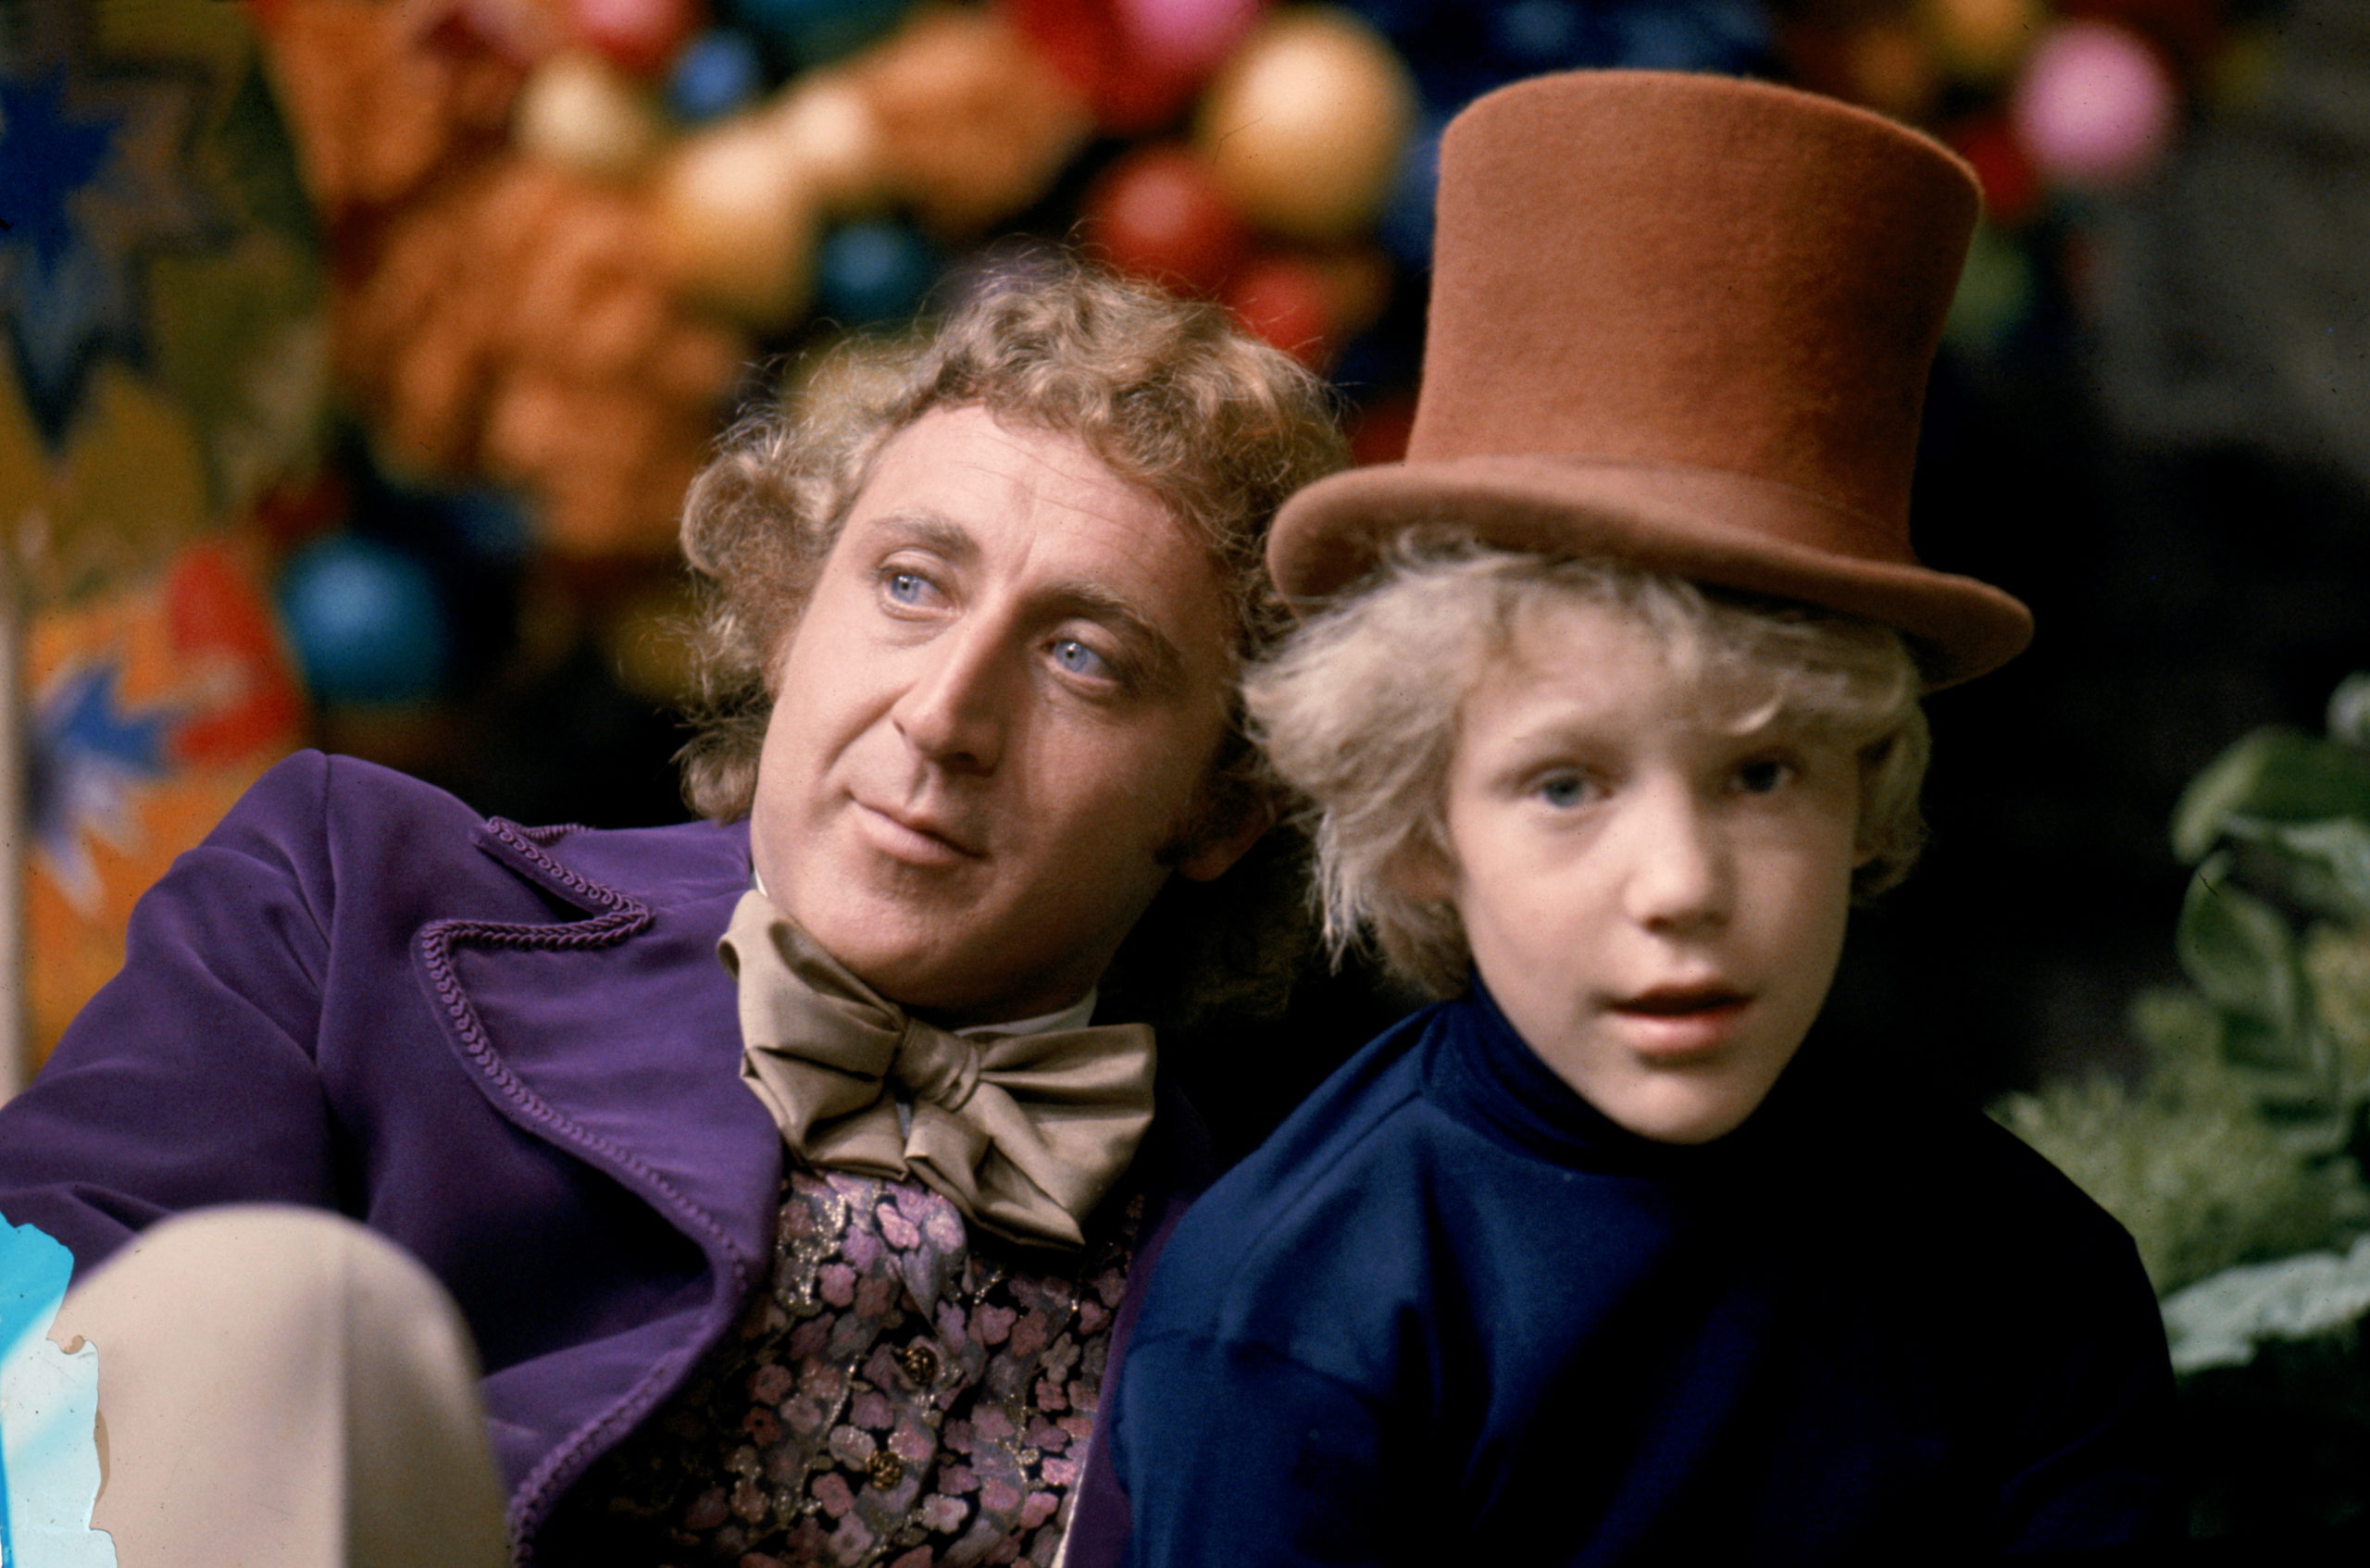 Actor Gene Wilder as Willy Wonka and Peter Ostrum as Charlie Bucket in the 1971 film 'Willy Wonka & the Chocolate Factory.' are seen in this undated handout image obtained by Reuters on June 23, 2021.    Warner Bros./Handout via REUTE